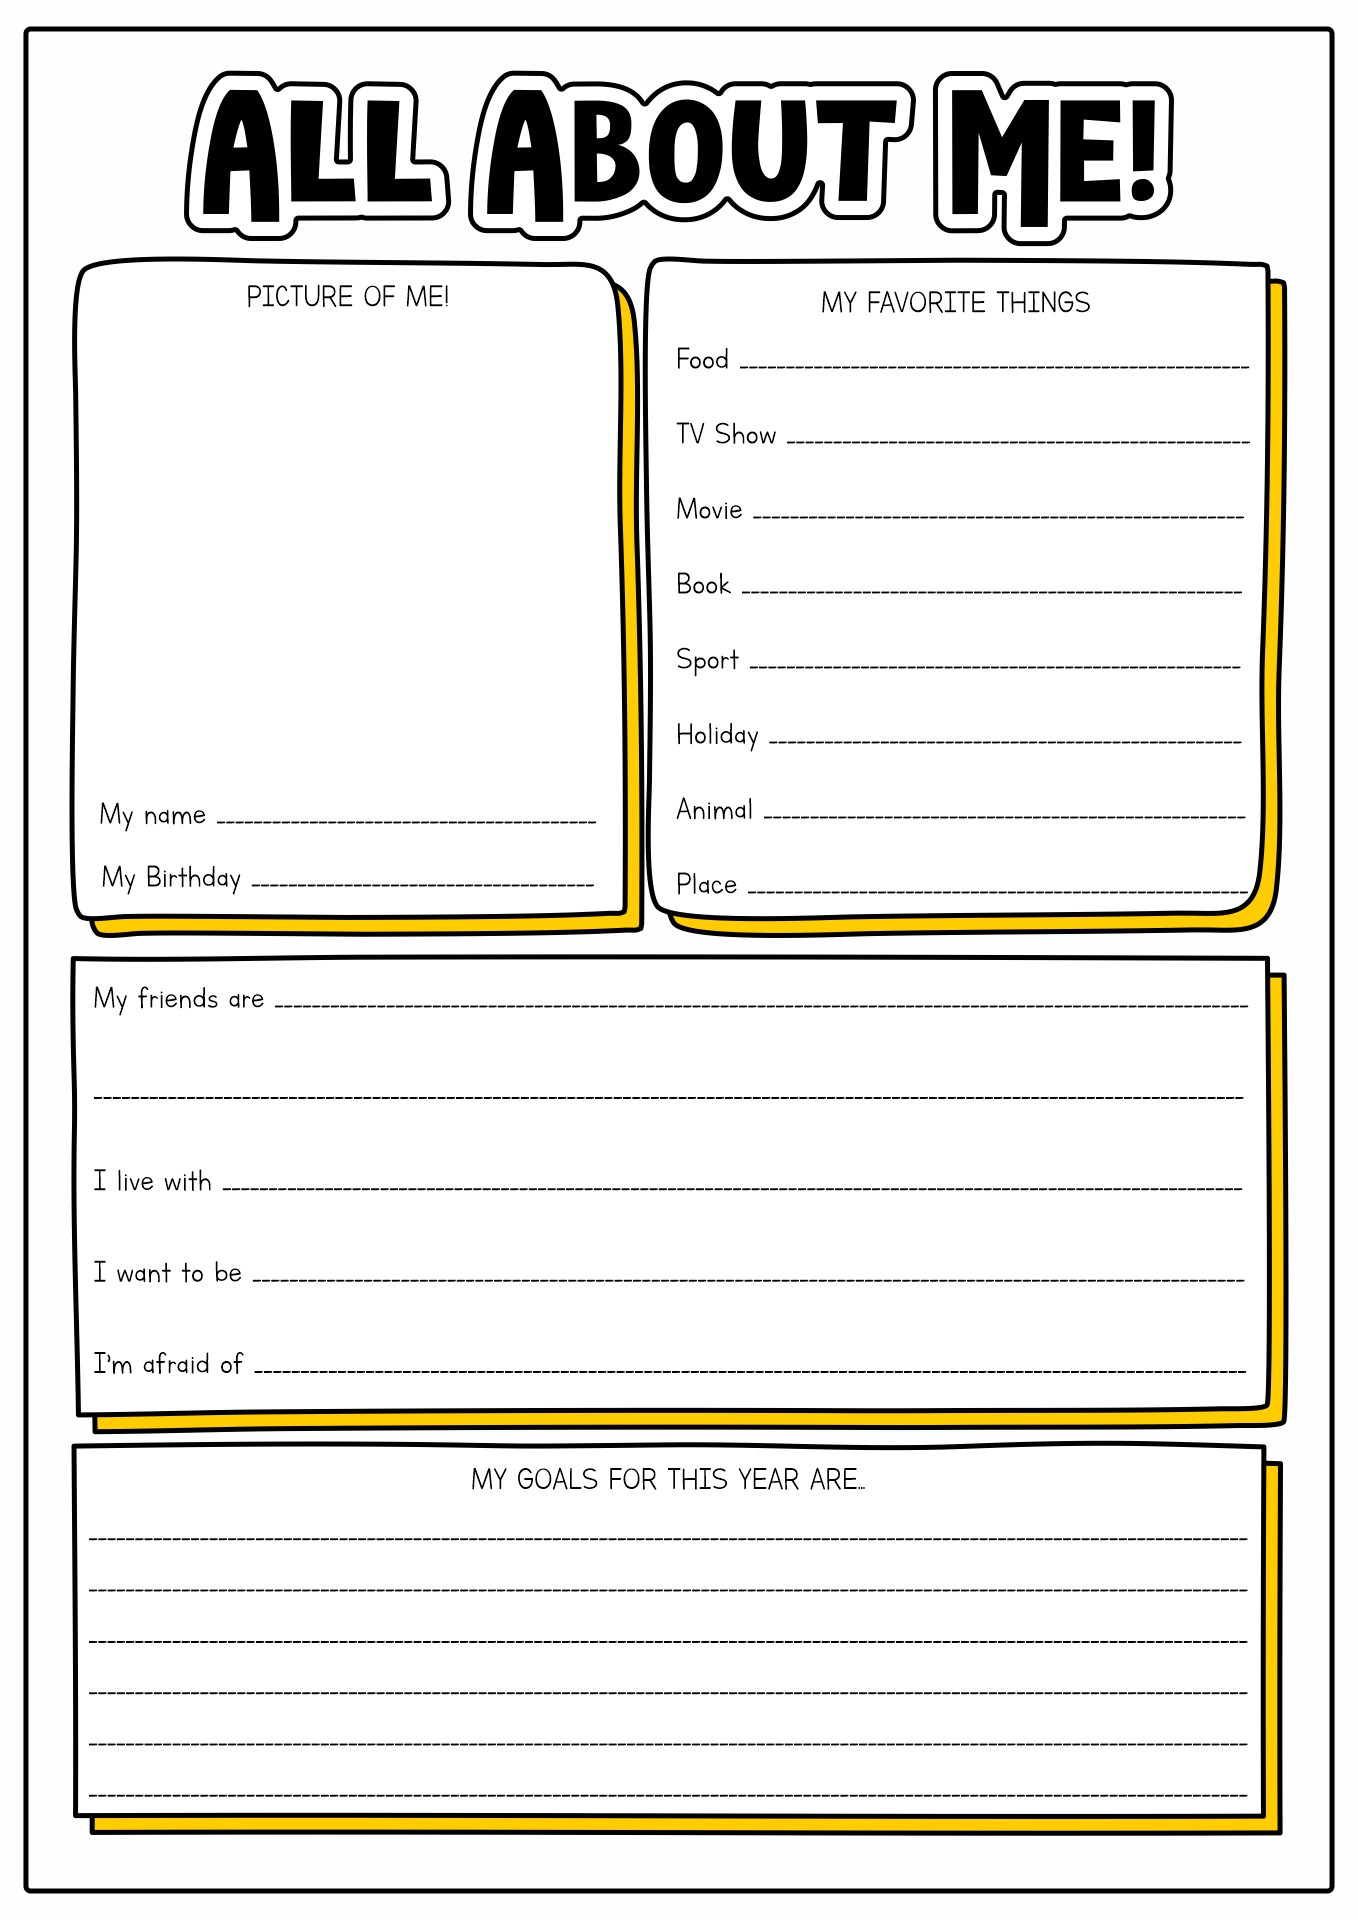 All About Me Worksheet For Adults Pdf